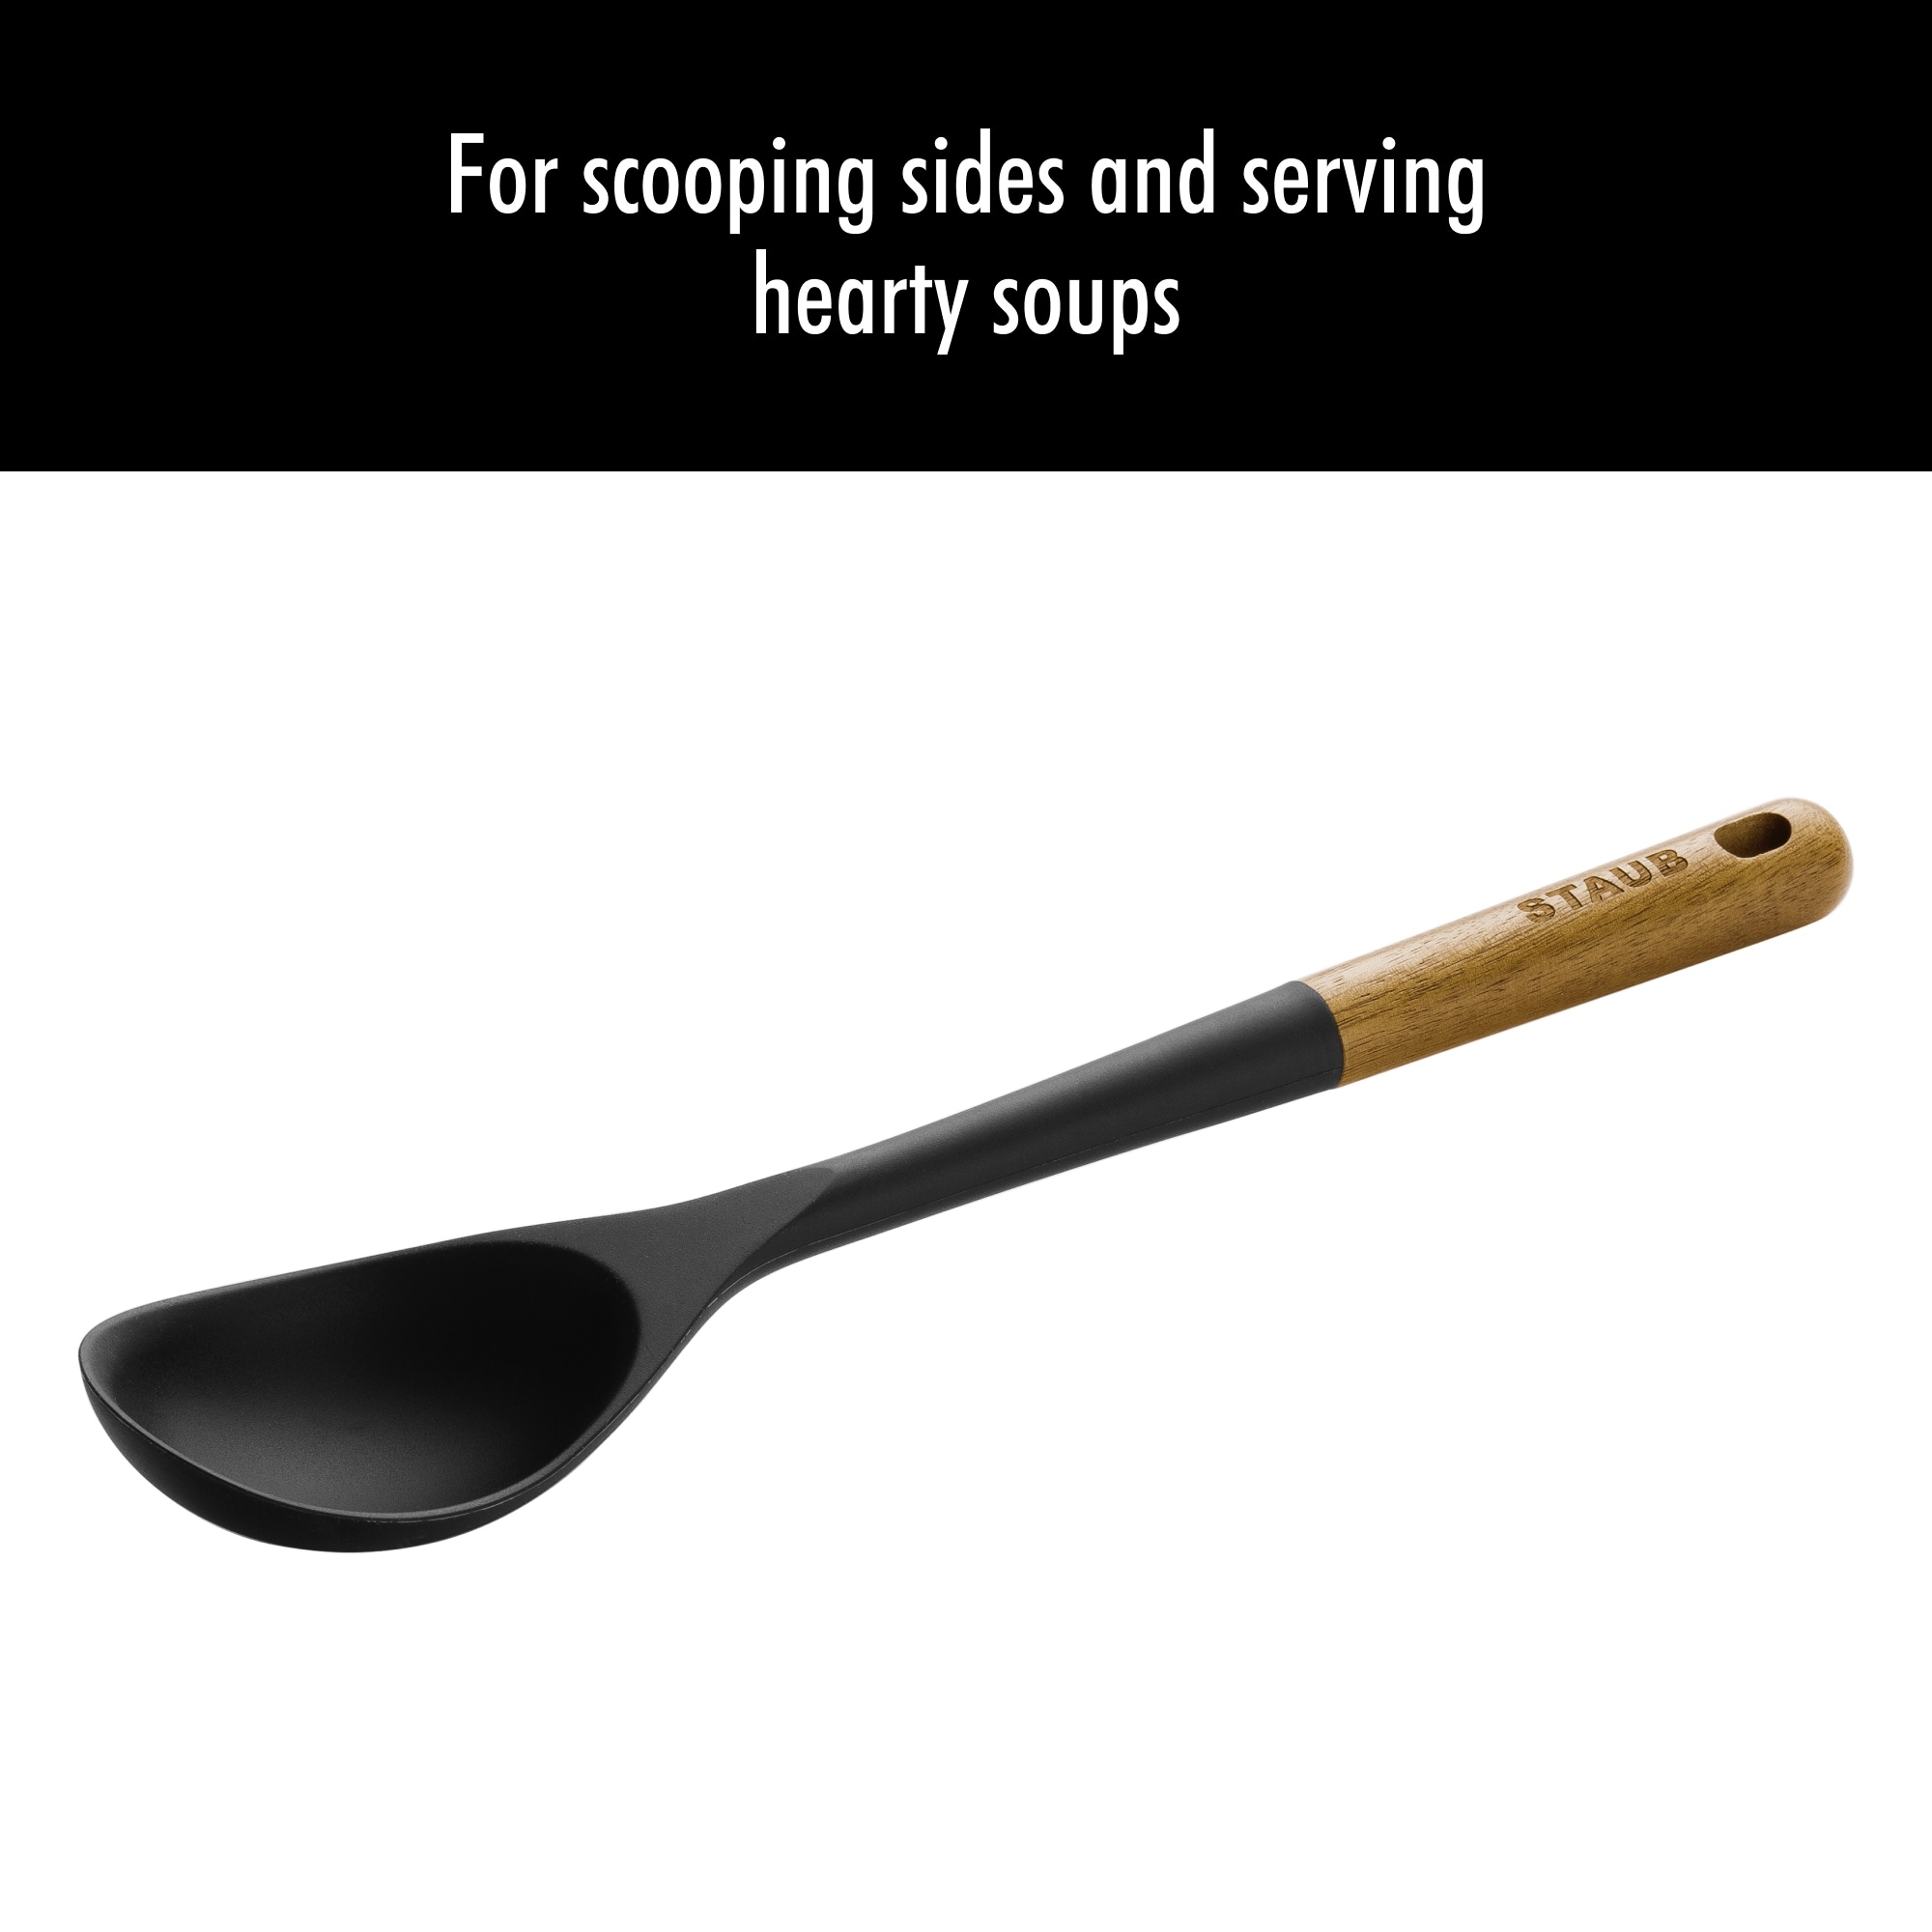 https://ak1.ostkcdn.com/images/products/is/images/direct/fe97da6c741796538fa944d0a759789d8ccfef60/Staub-Silicone-with-Wood-Handle-Cooking-Utensil%2C-Serving-Spoon.jpg